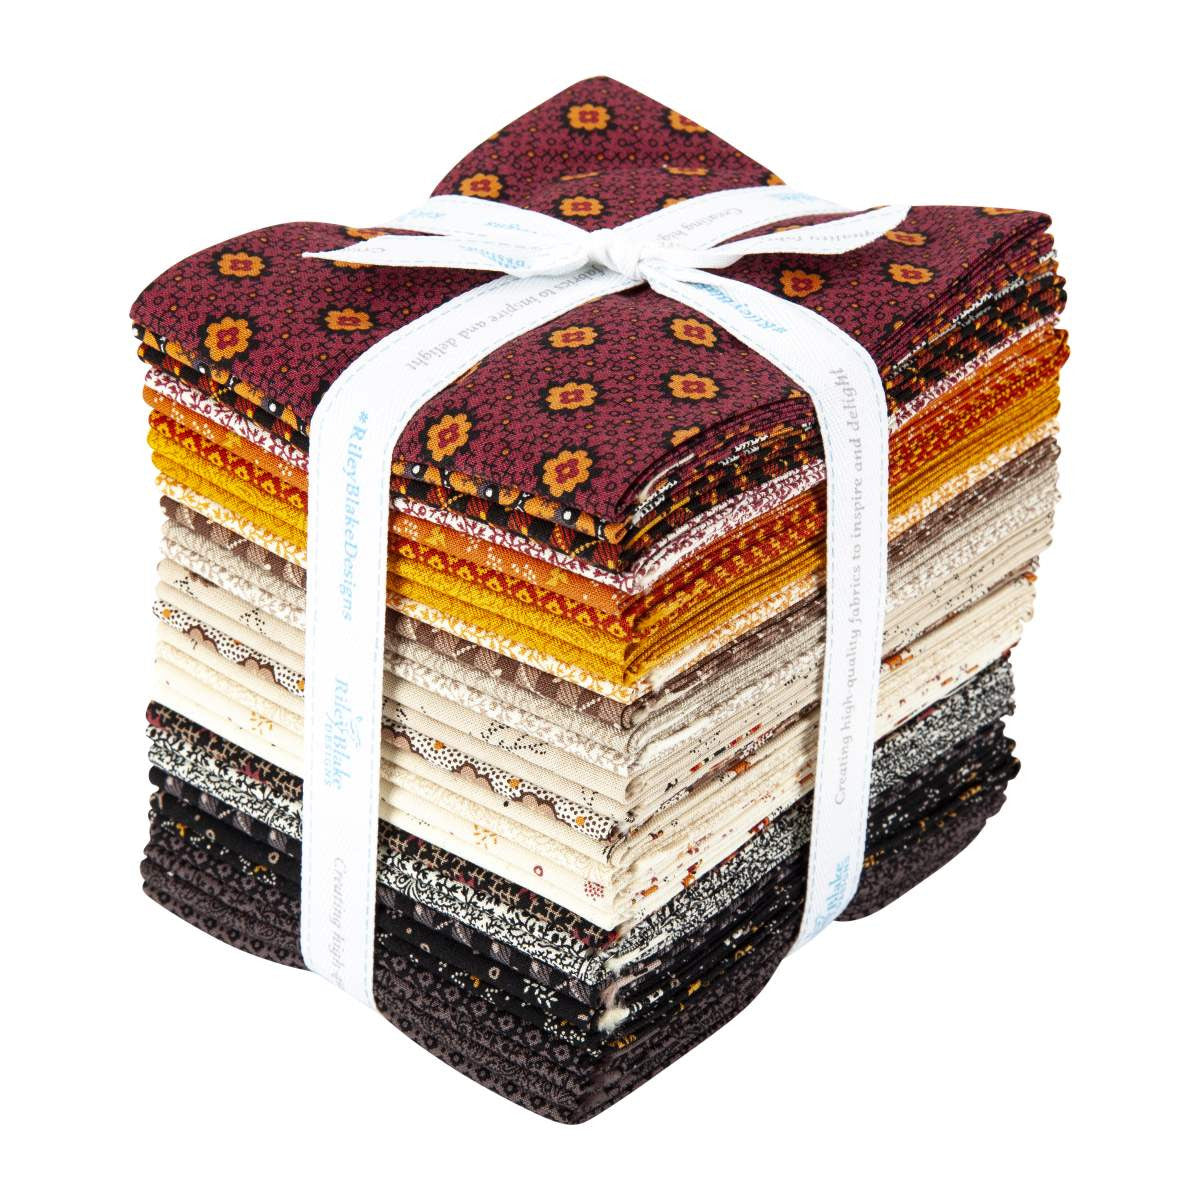 This Fat Quarter precut bundle includes 29 pieces from the Bountiful Autumn collection by Stacy West of Buttermilk Basin Design Co. for Riley Blake Designs.  100% cotton  Width: 18" x 22"